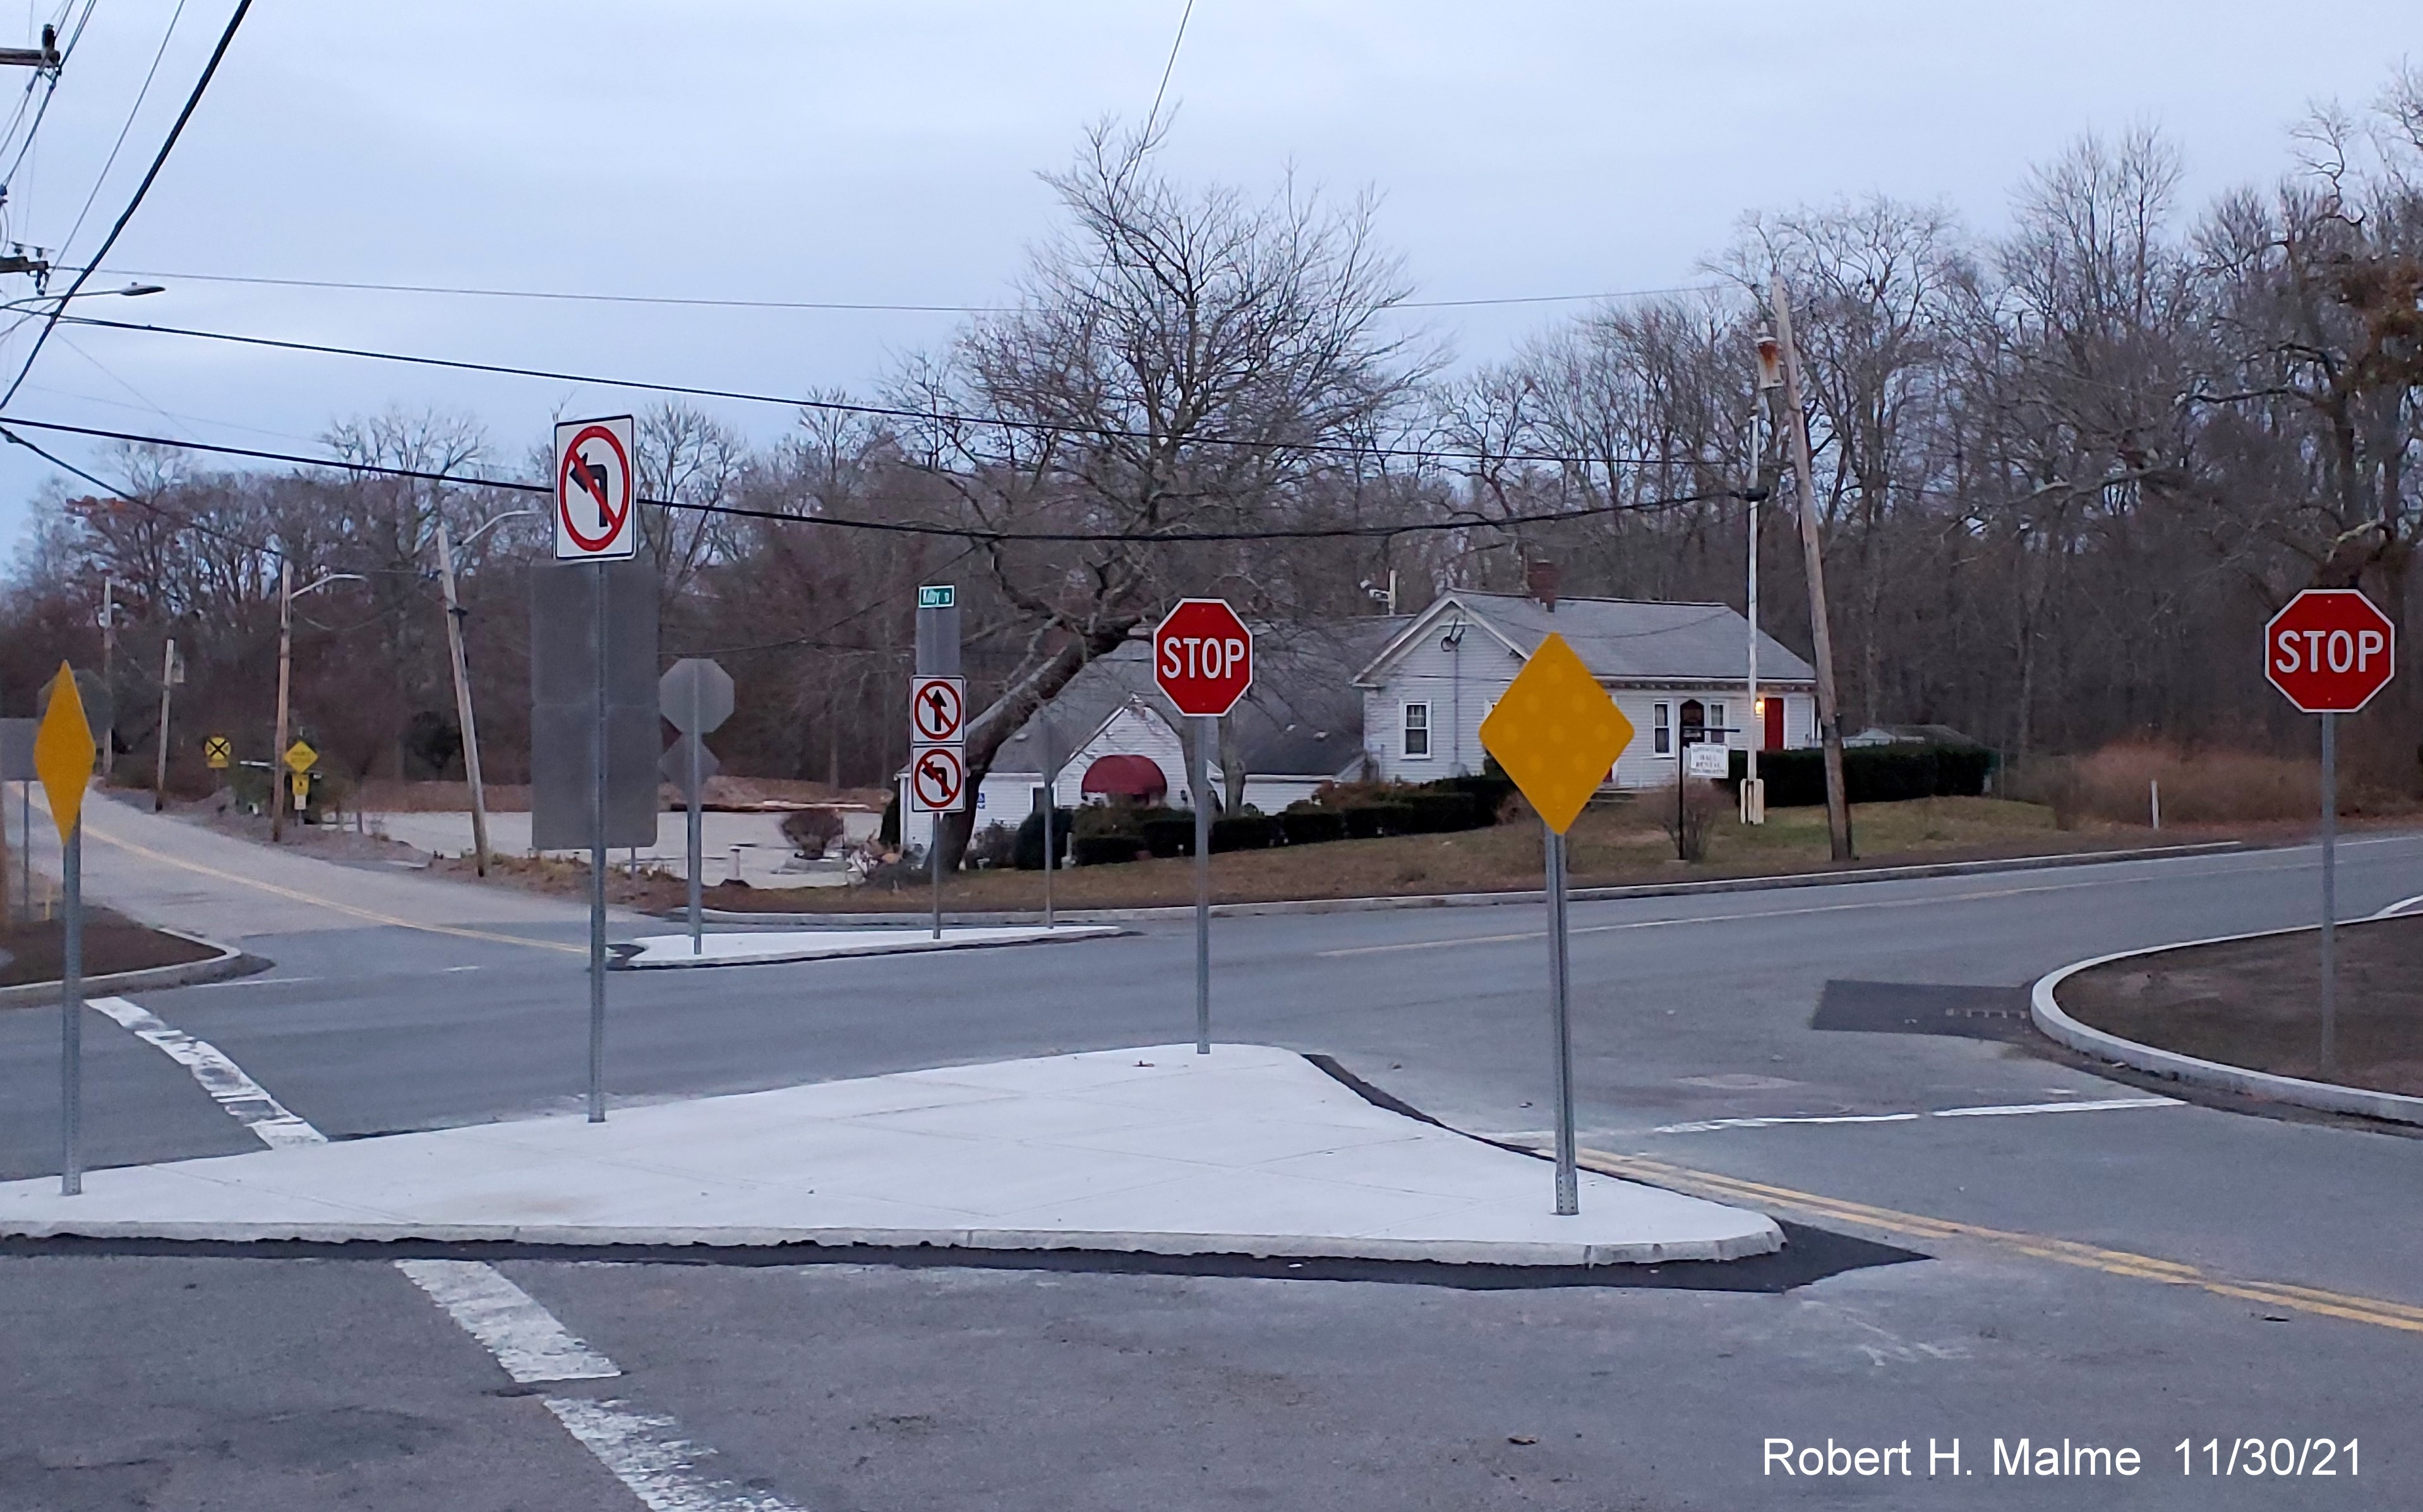 Image of new permanent signs placed in new traffic islands at intersection of Kilby Street and MA 3A in Hingham, November 2021